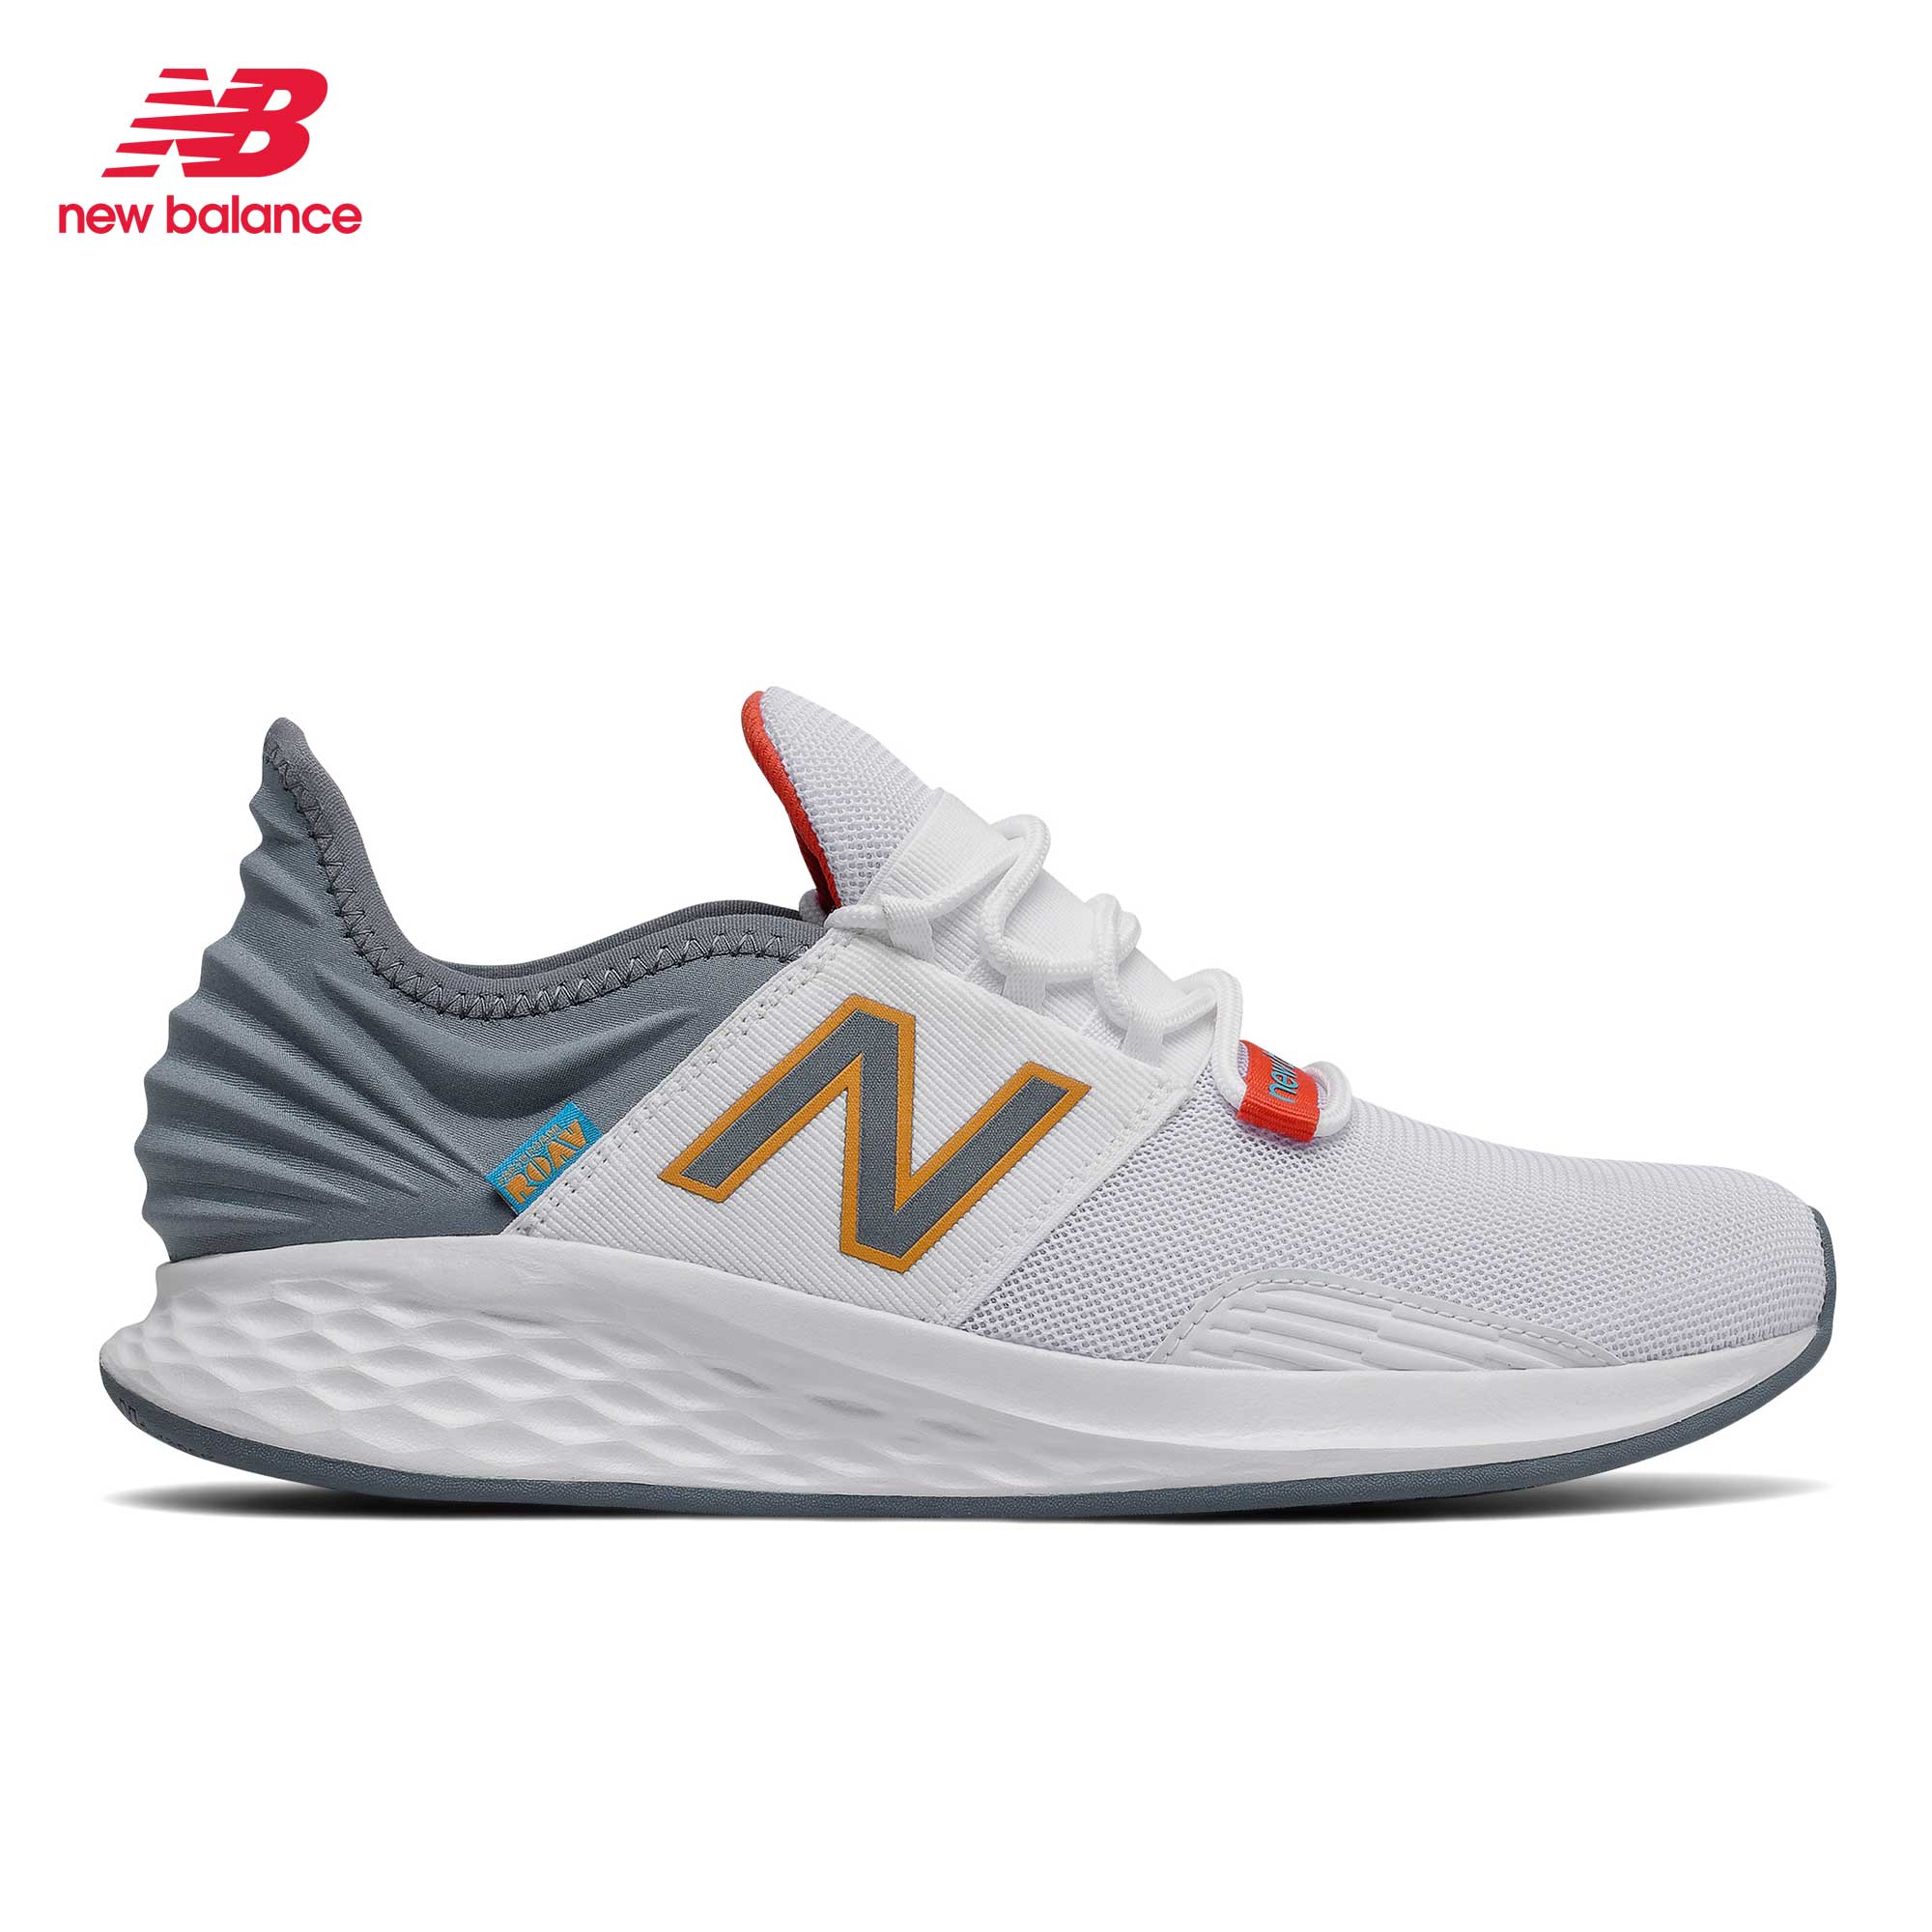 new balance shoes in philippines 